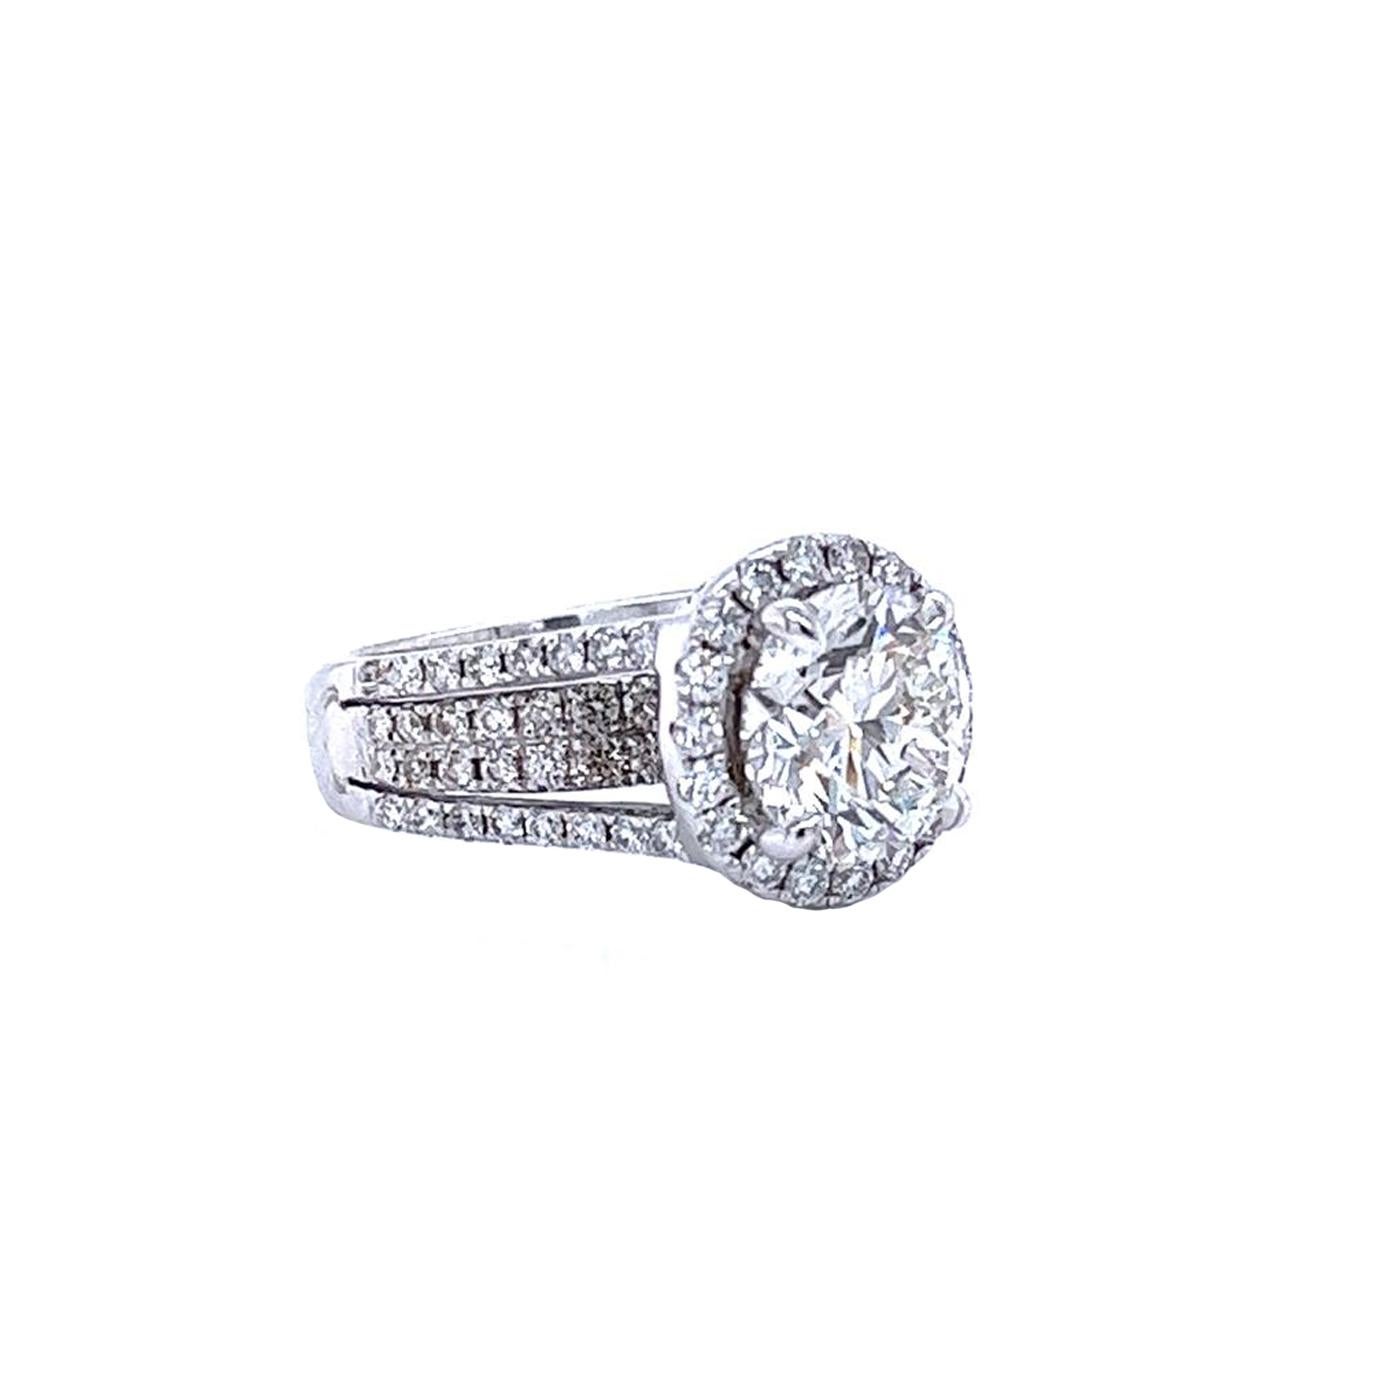 3.01ct GIA Round Diamond Ring Accented with Natural Pave Diamonds 18K White Gold In Good Condition For Sale In Aventura, FL